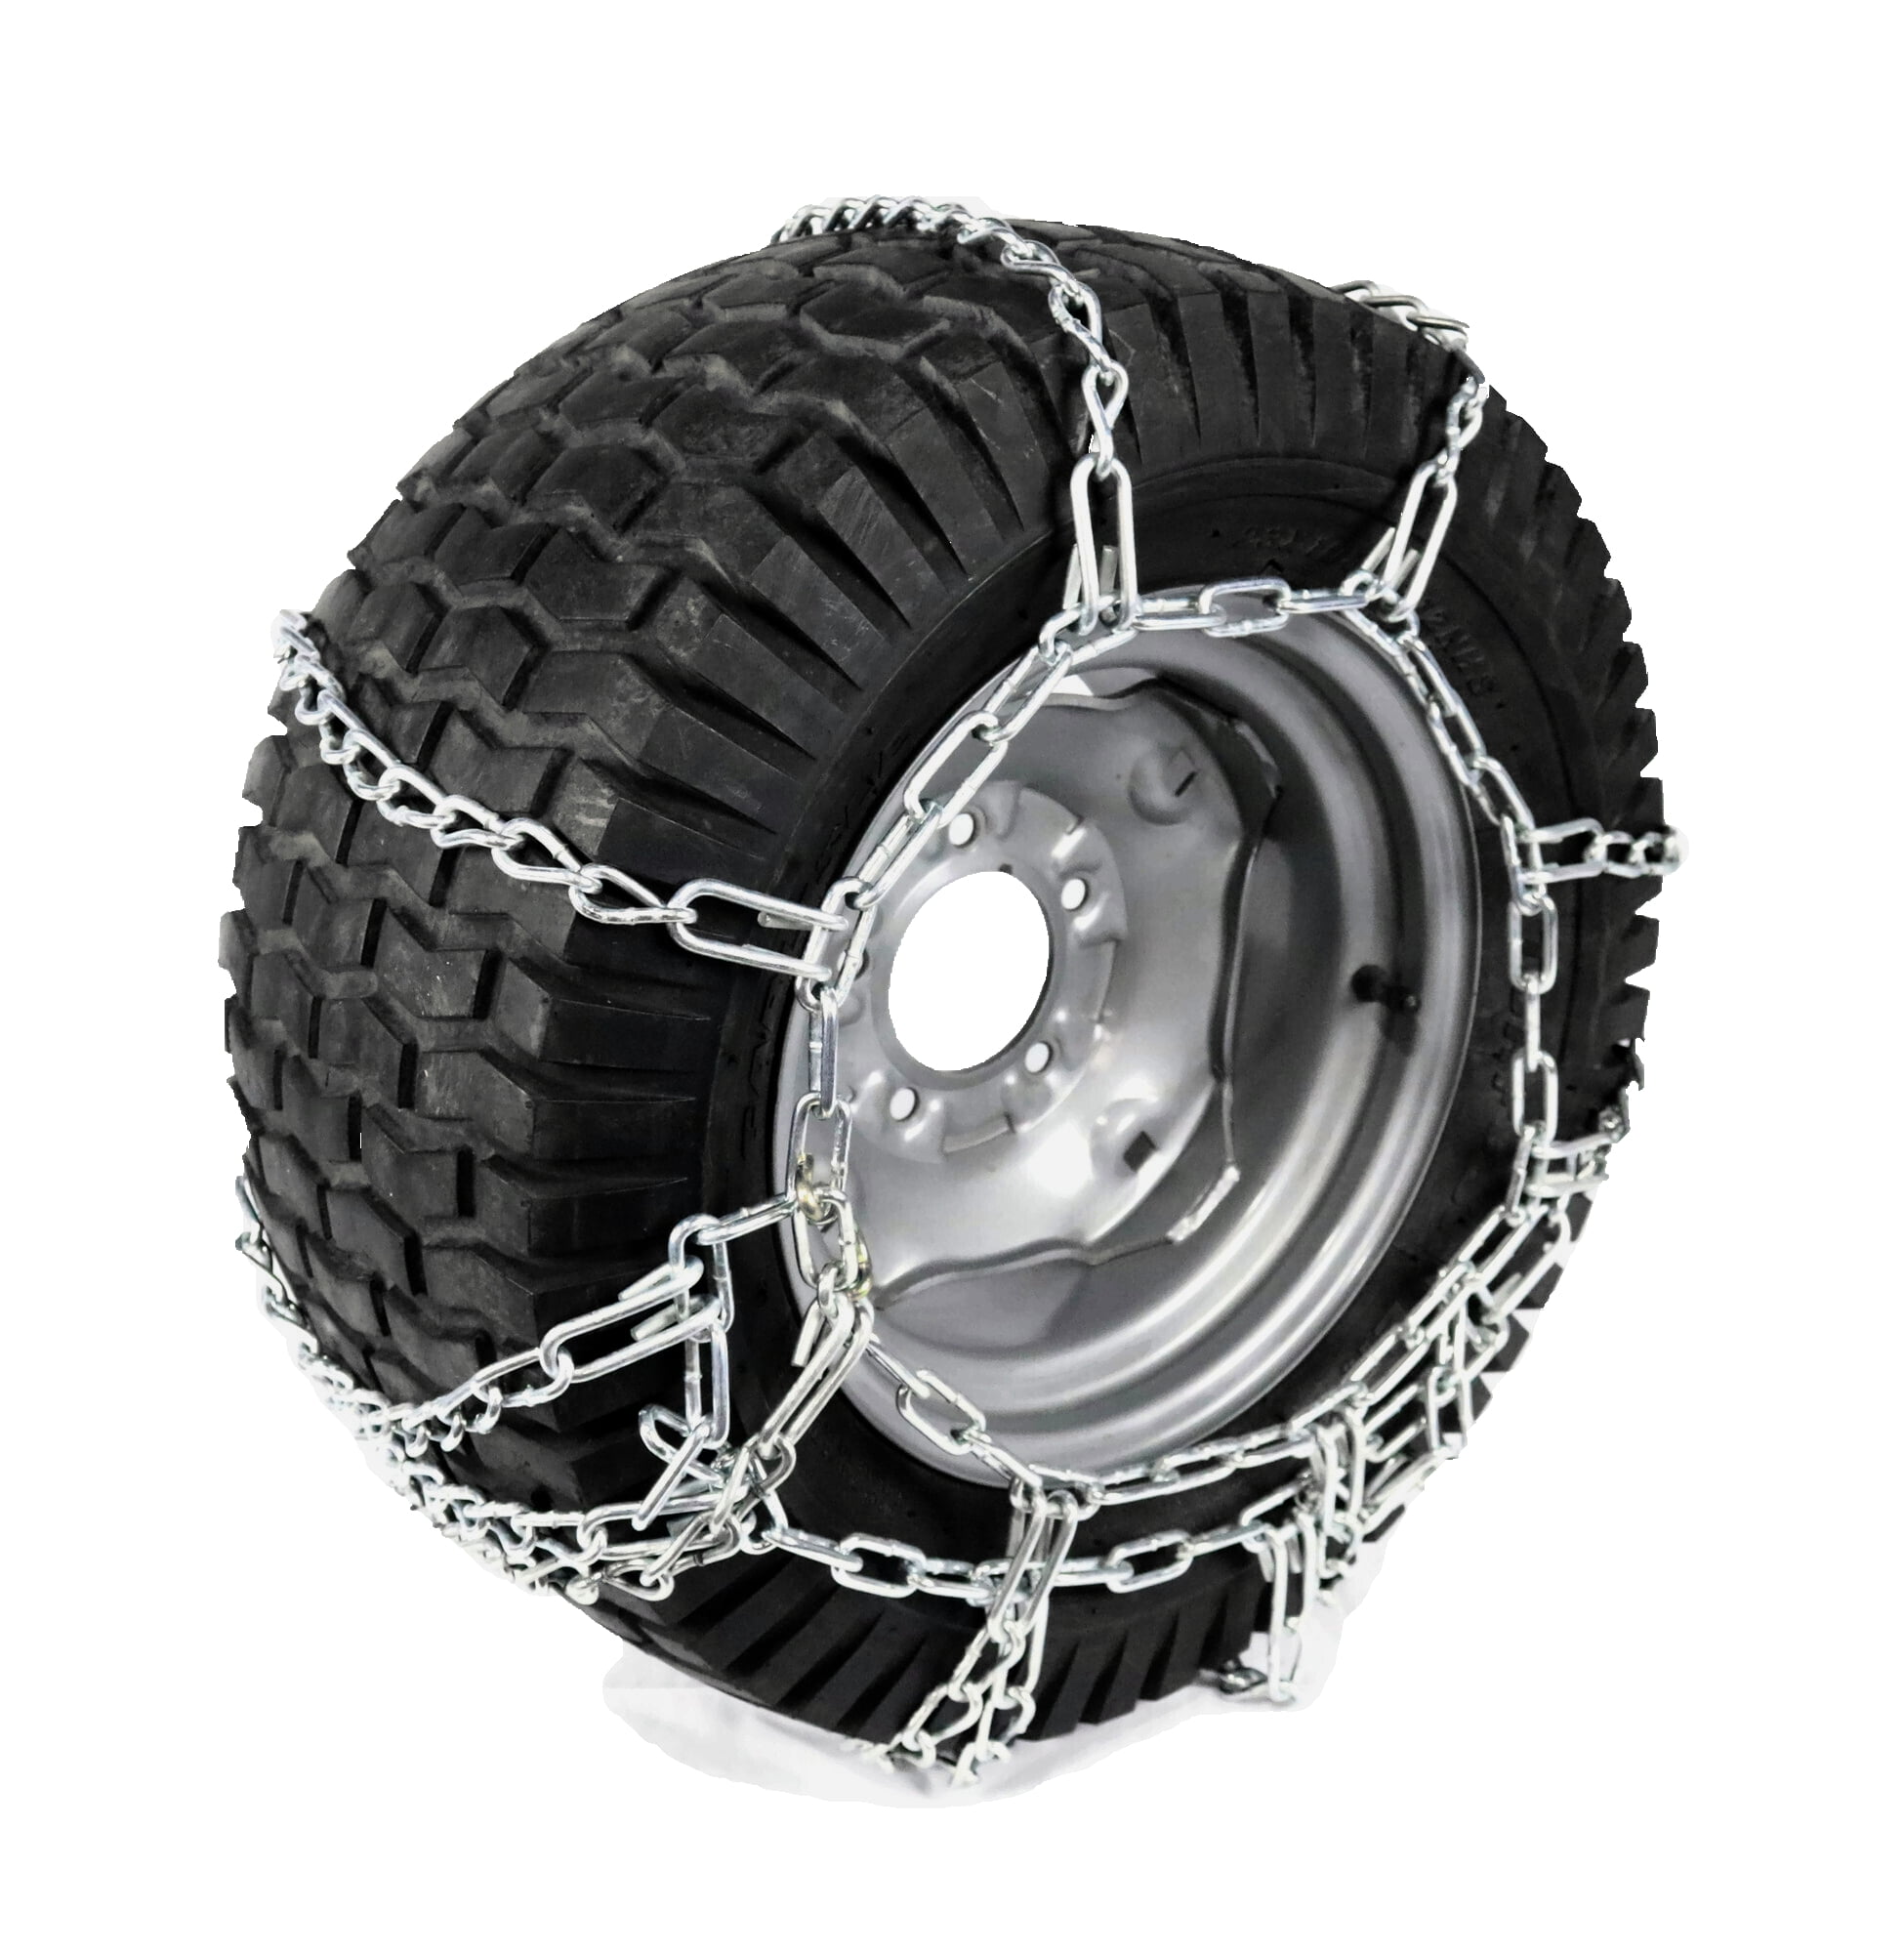 The ROP Shop New Pair 2 Link TIRE Chains 18x8.50x8 for Garden Tractors/Riders/Snowblower 